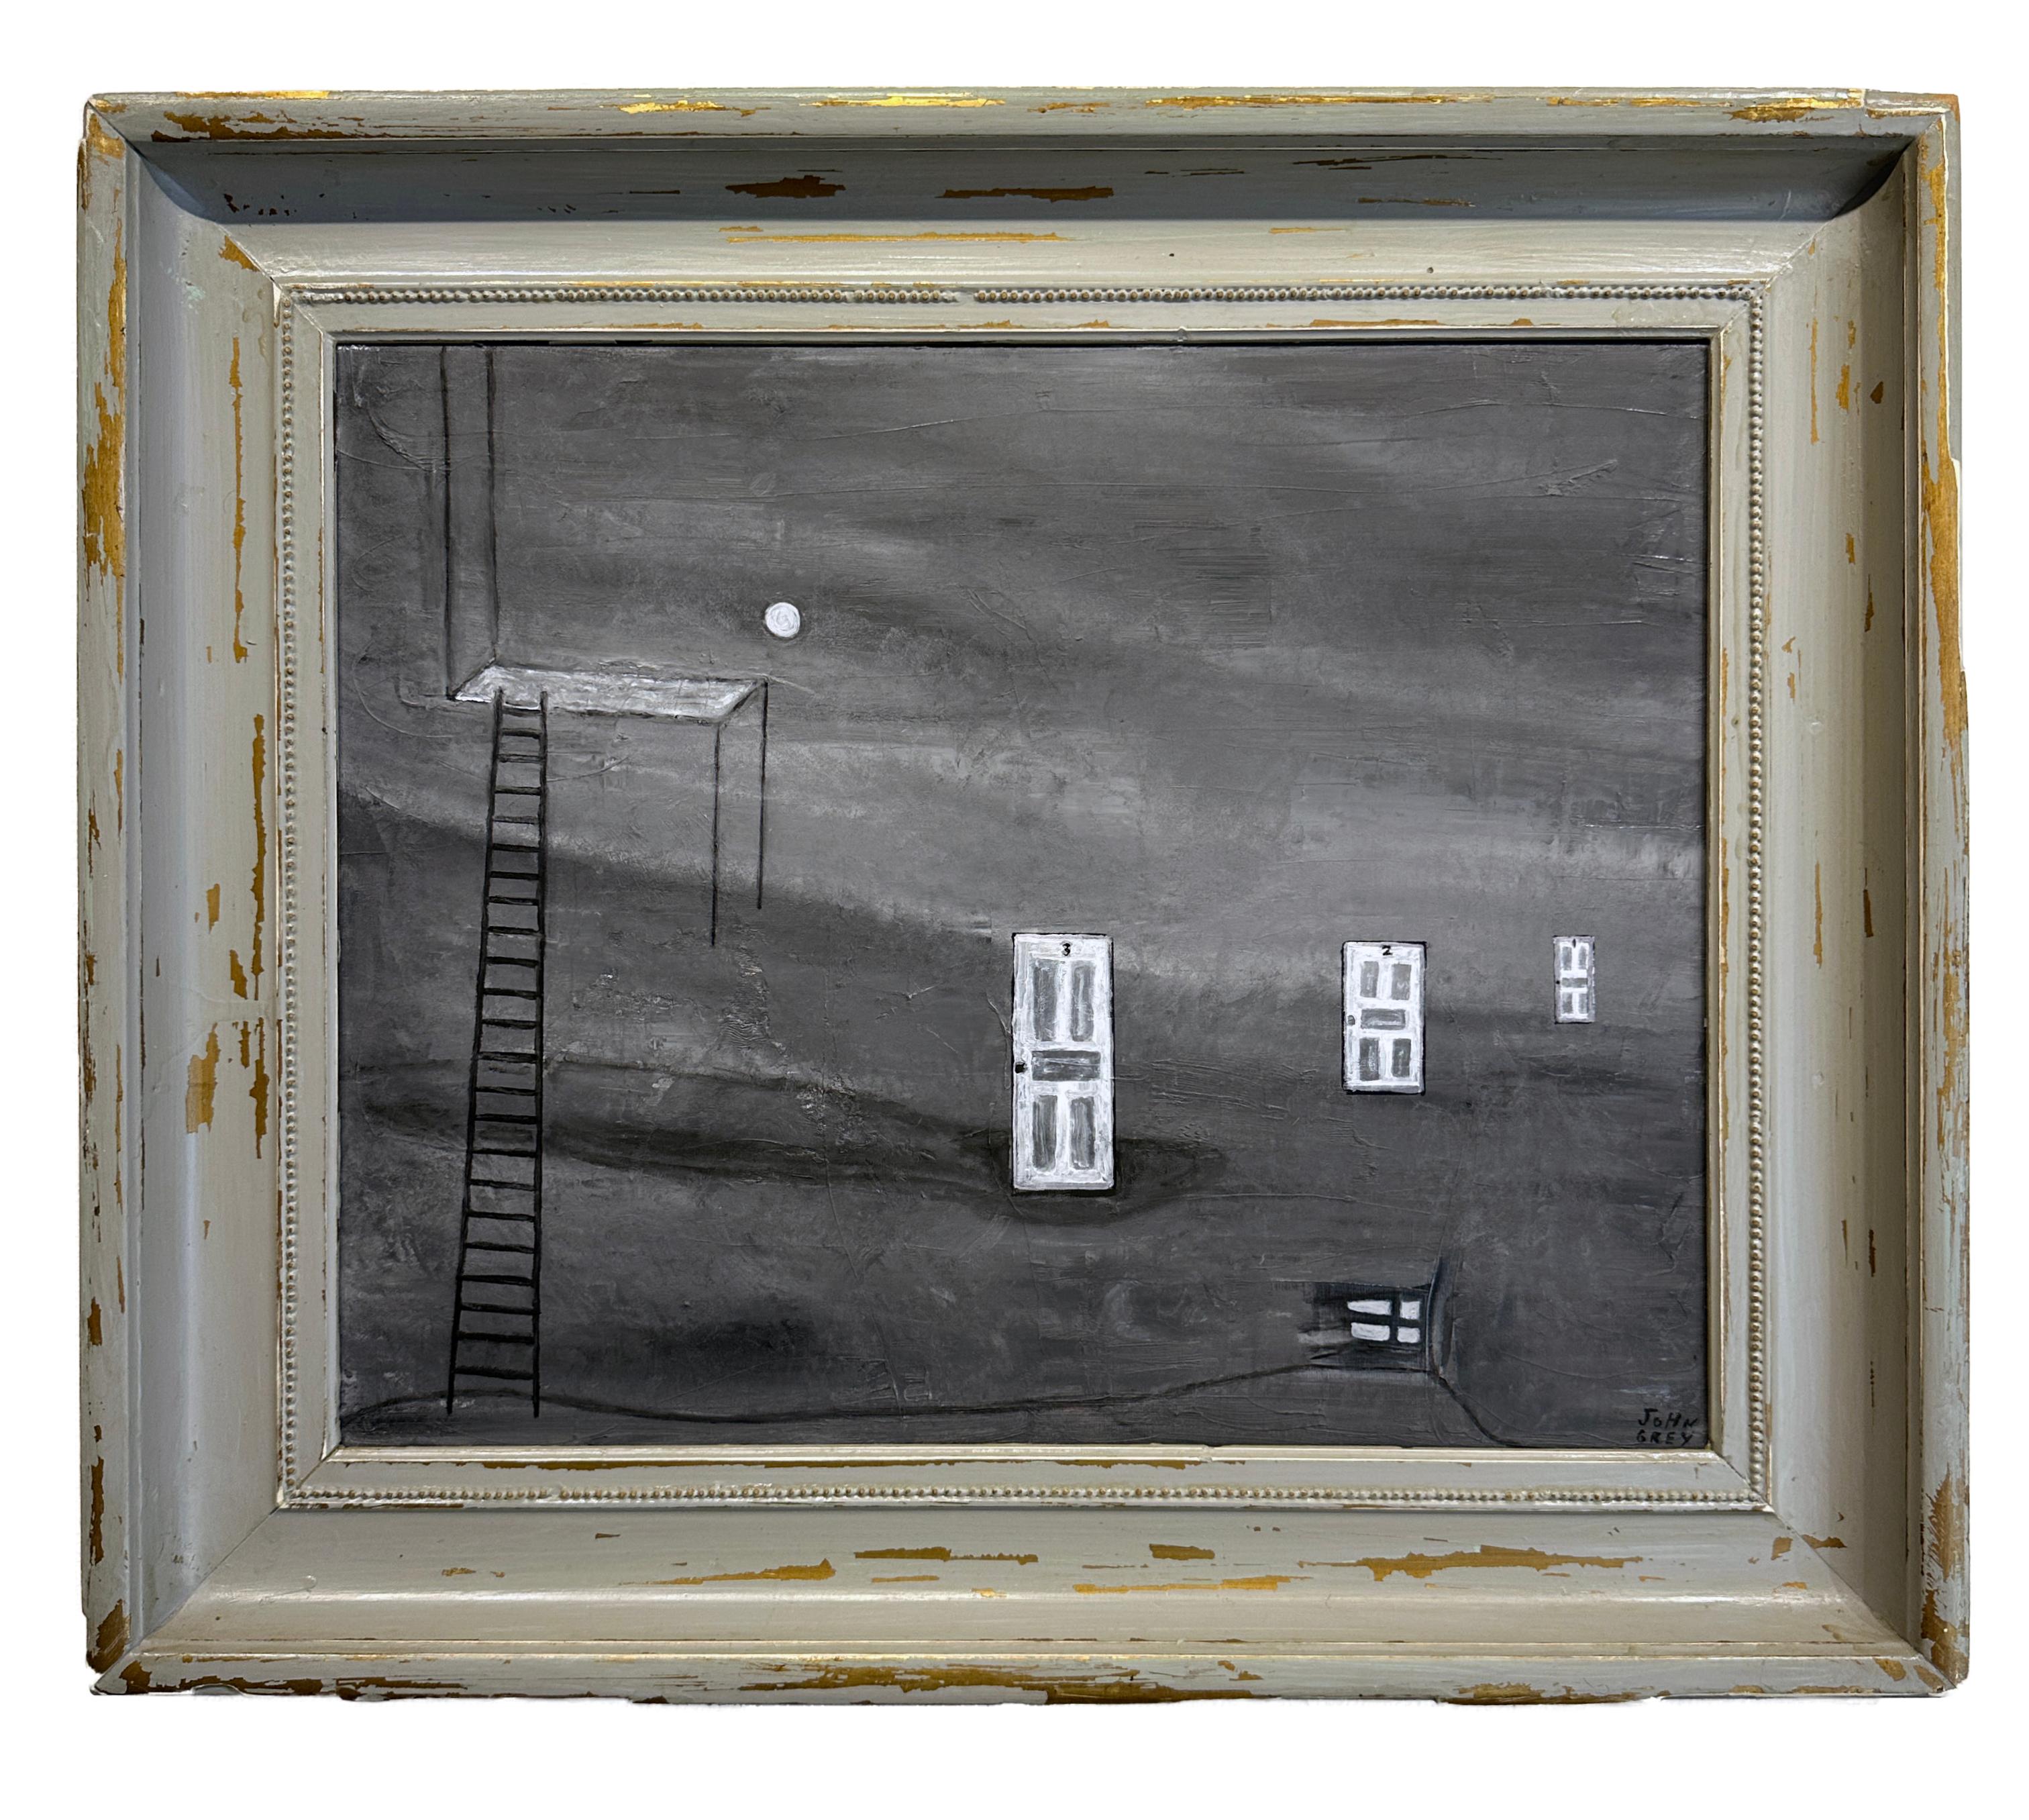 John Seubert Abstract Painting - Echo - Monochromatic Scene, Ladder and Doors in Muted Gray, Original Oil, Framed